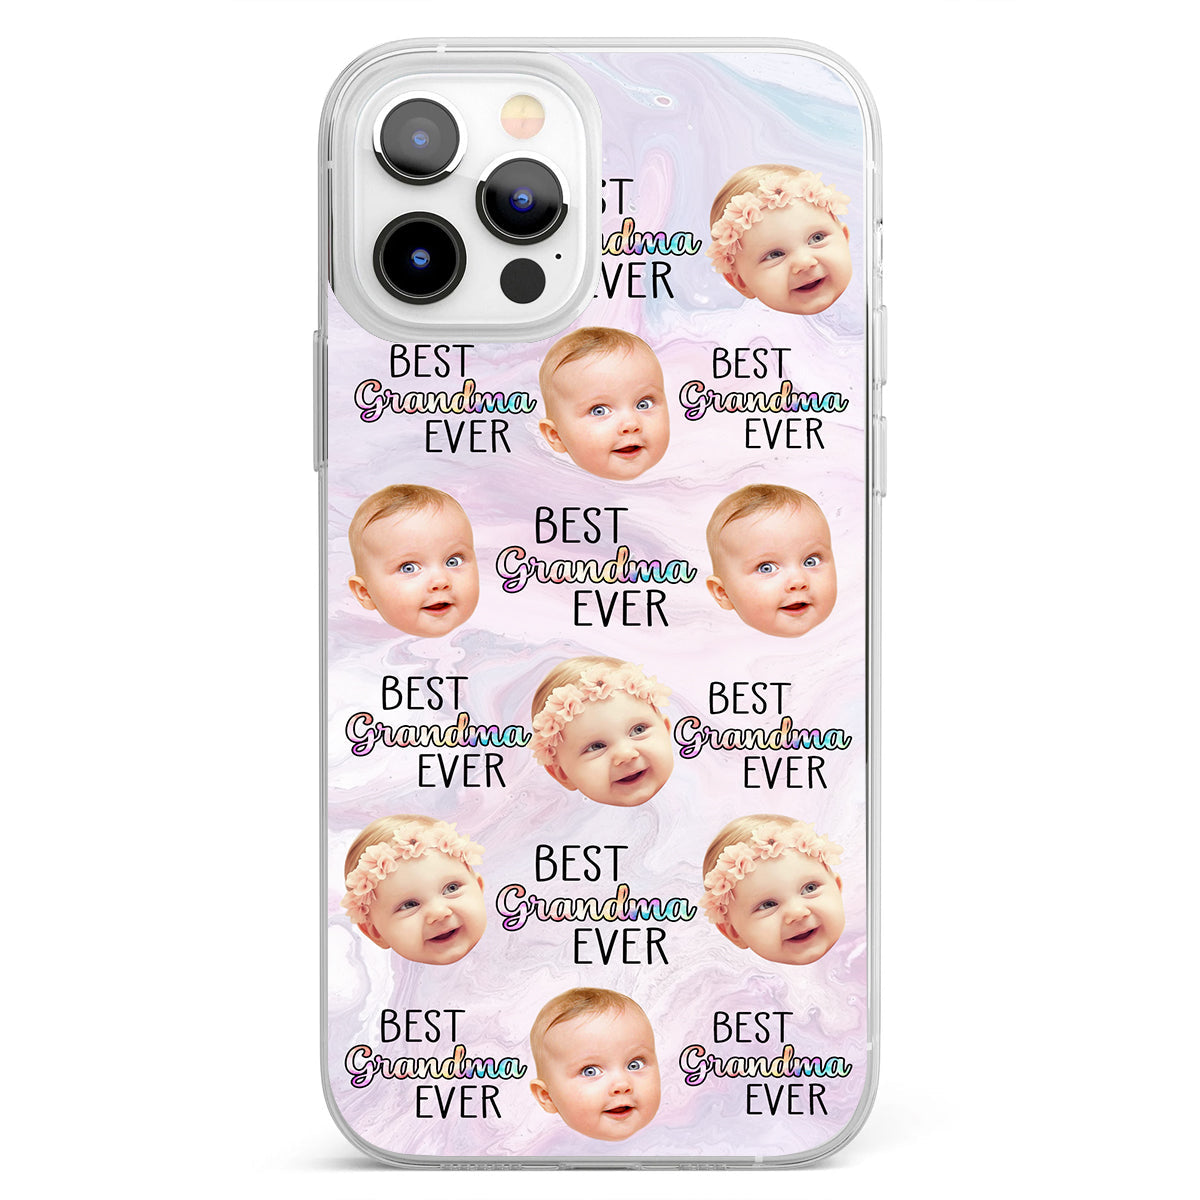 Best Grandma Ever - Custom Photo And Background Color - Personalized Phone Case, Gift For Family